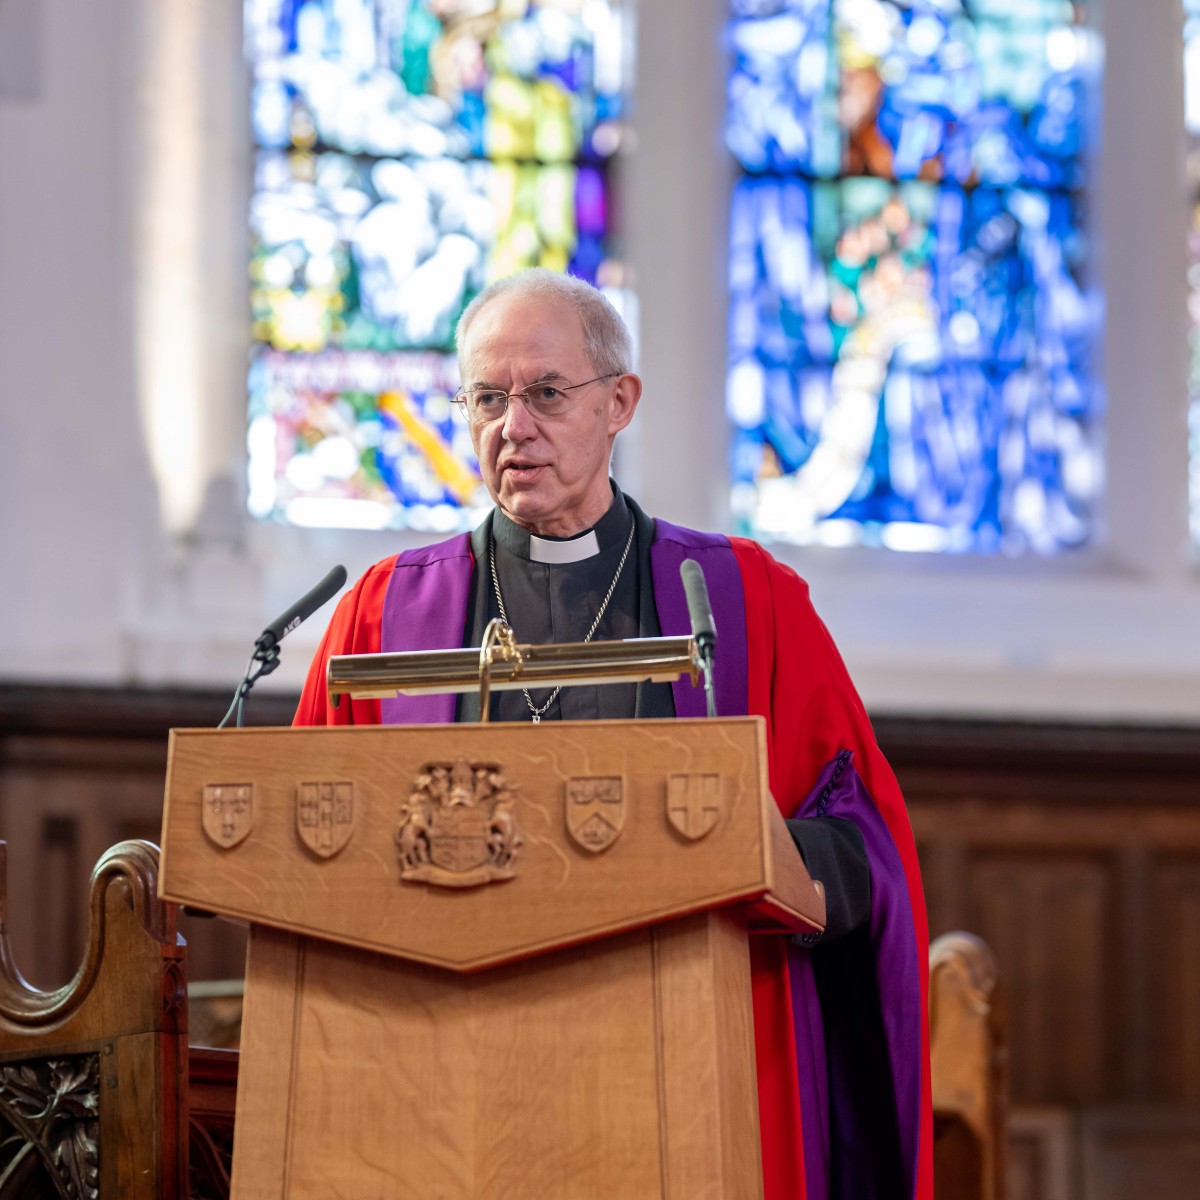 Today we welcomed the Archbishop of Canterbury, Justin Welby, to the Aberdeen family with the awarding of an honorary Doctorate of Divinity in recognition of his contributions to faith and society abdn.io/FA